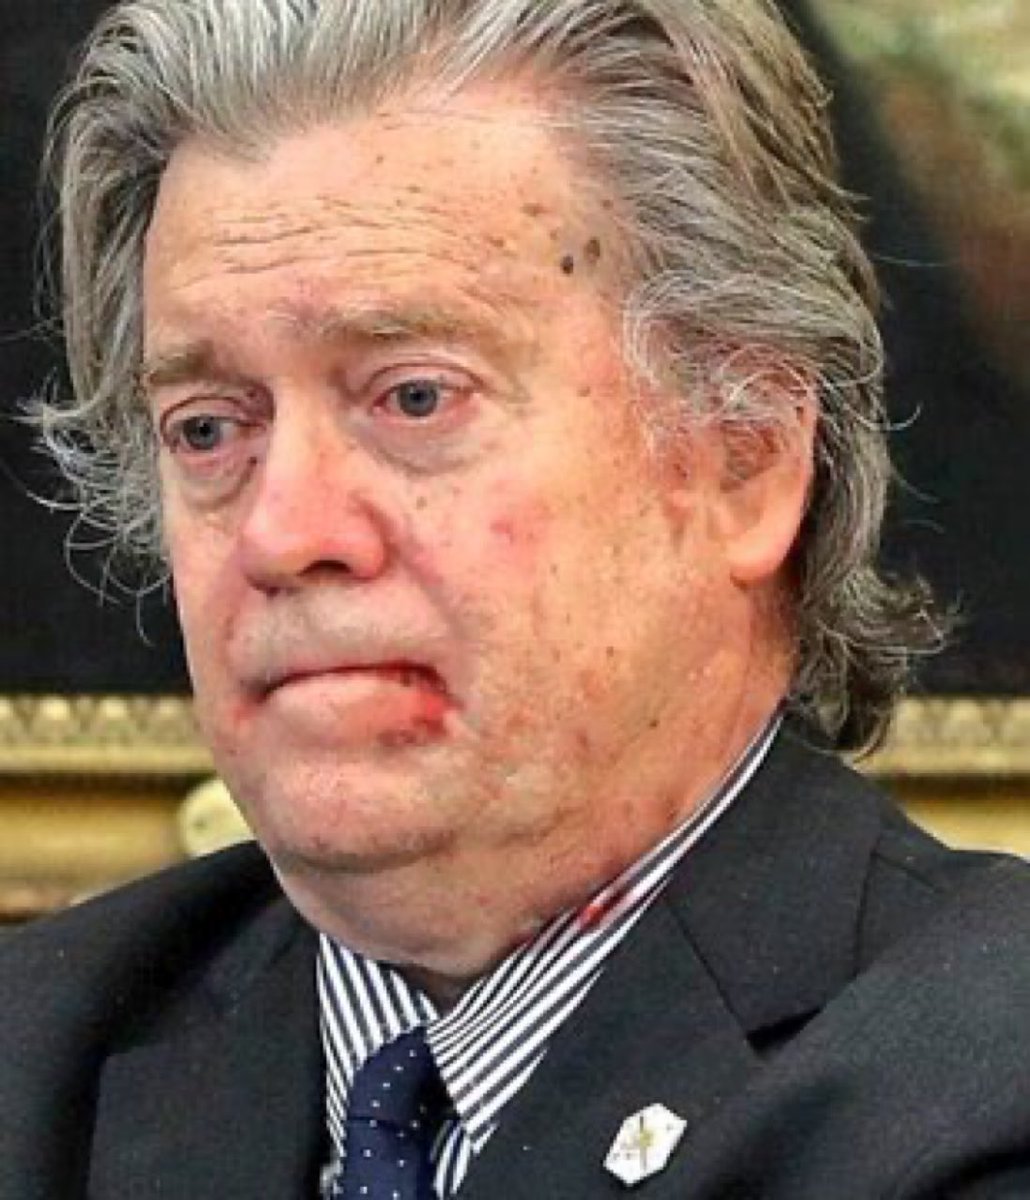 What do you think Steve Bannon smells like? (Notice the blood and pus on the shirt collar)